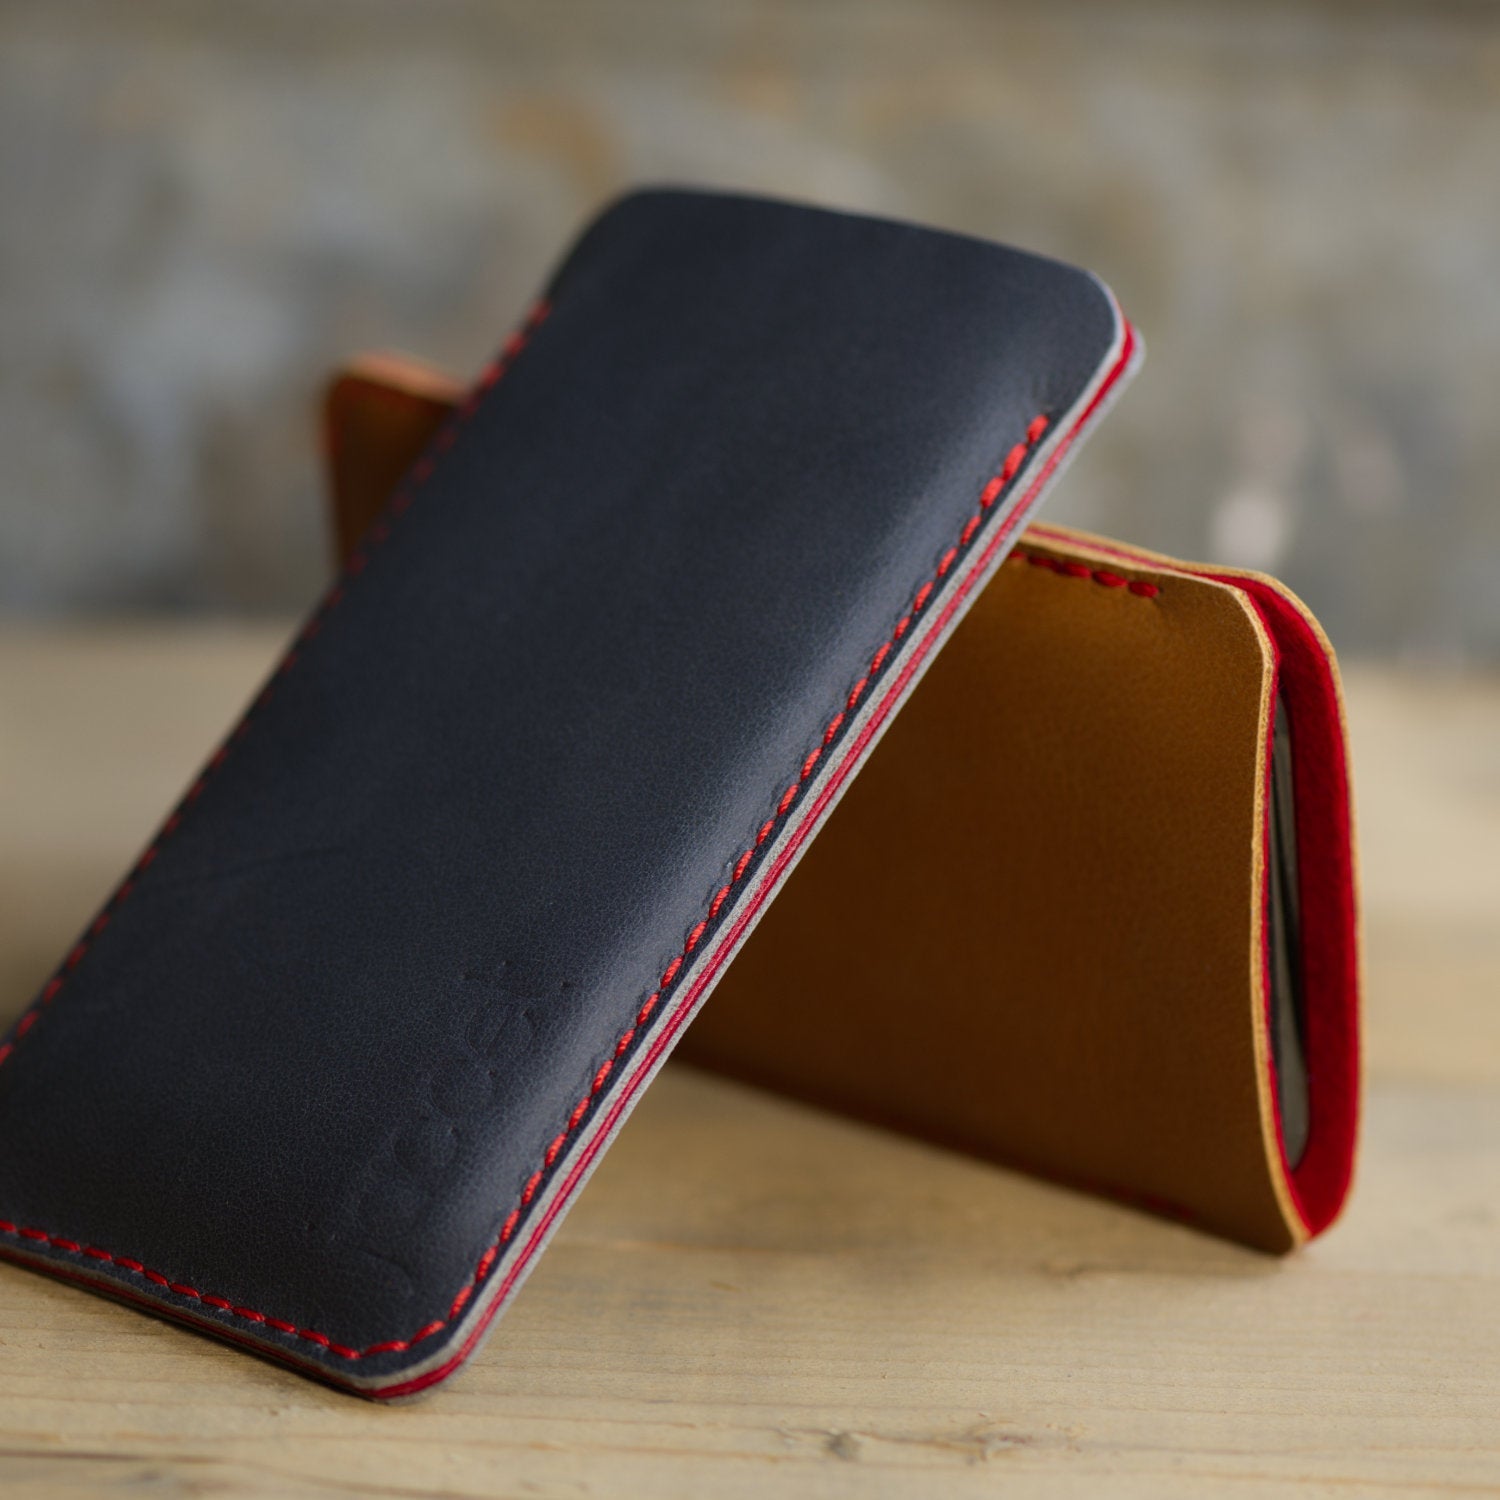 JACCET leather OnePlus sleeve - anthracite/black leather with red wool felt. 100% Handmade